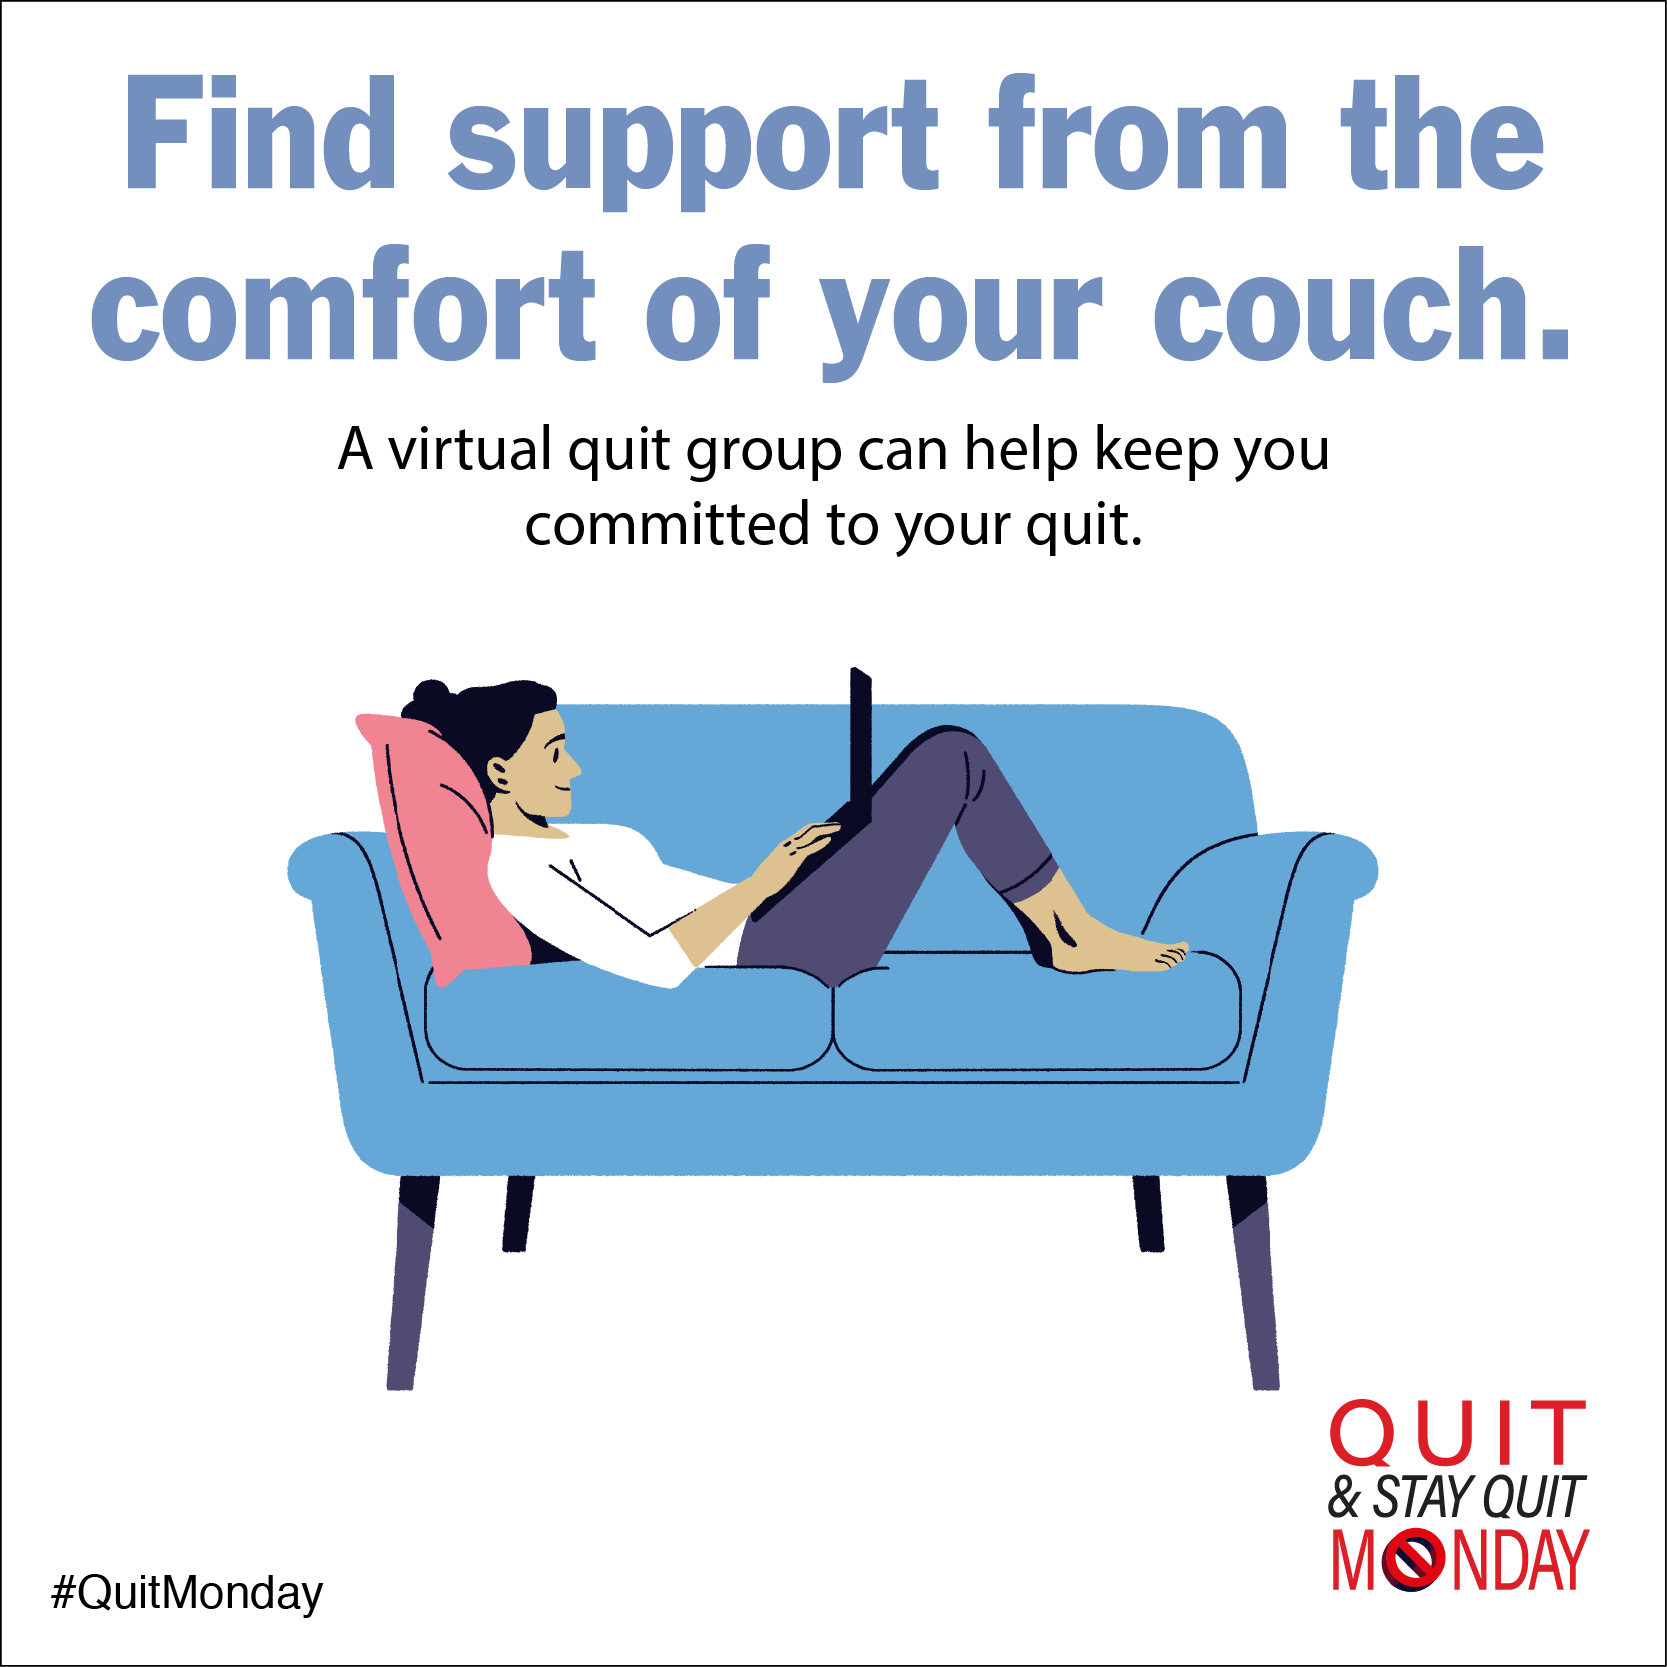 Find support from the comfort of your couch. A virtual quit group can help keep you committed to your quit.